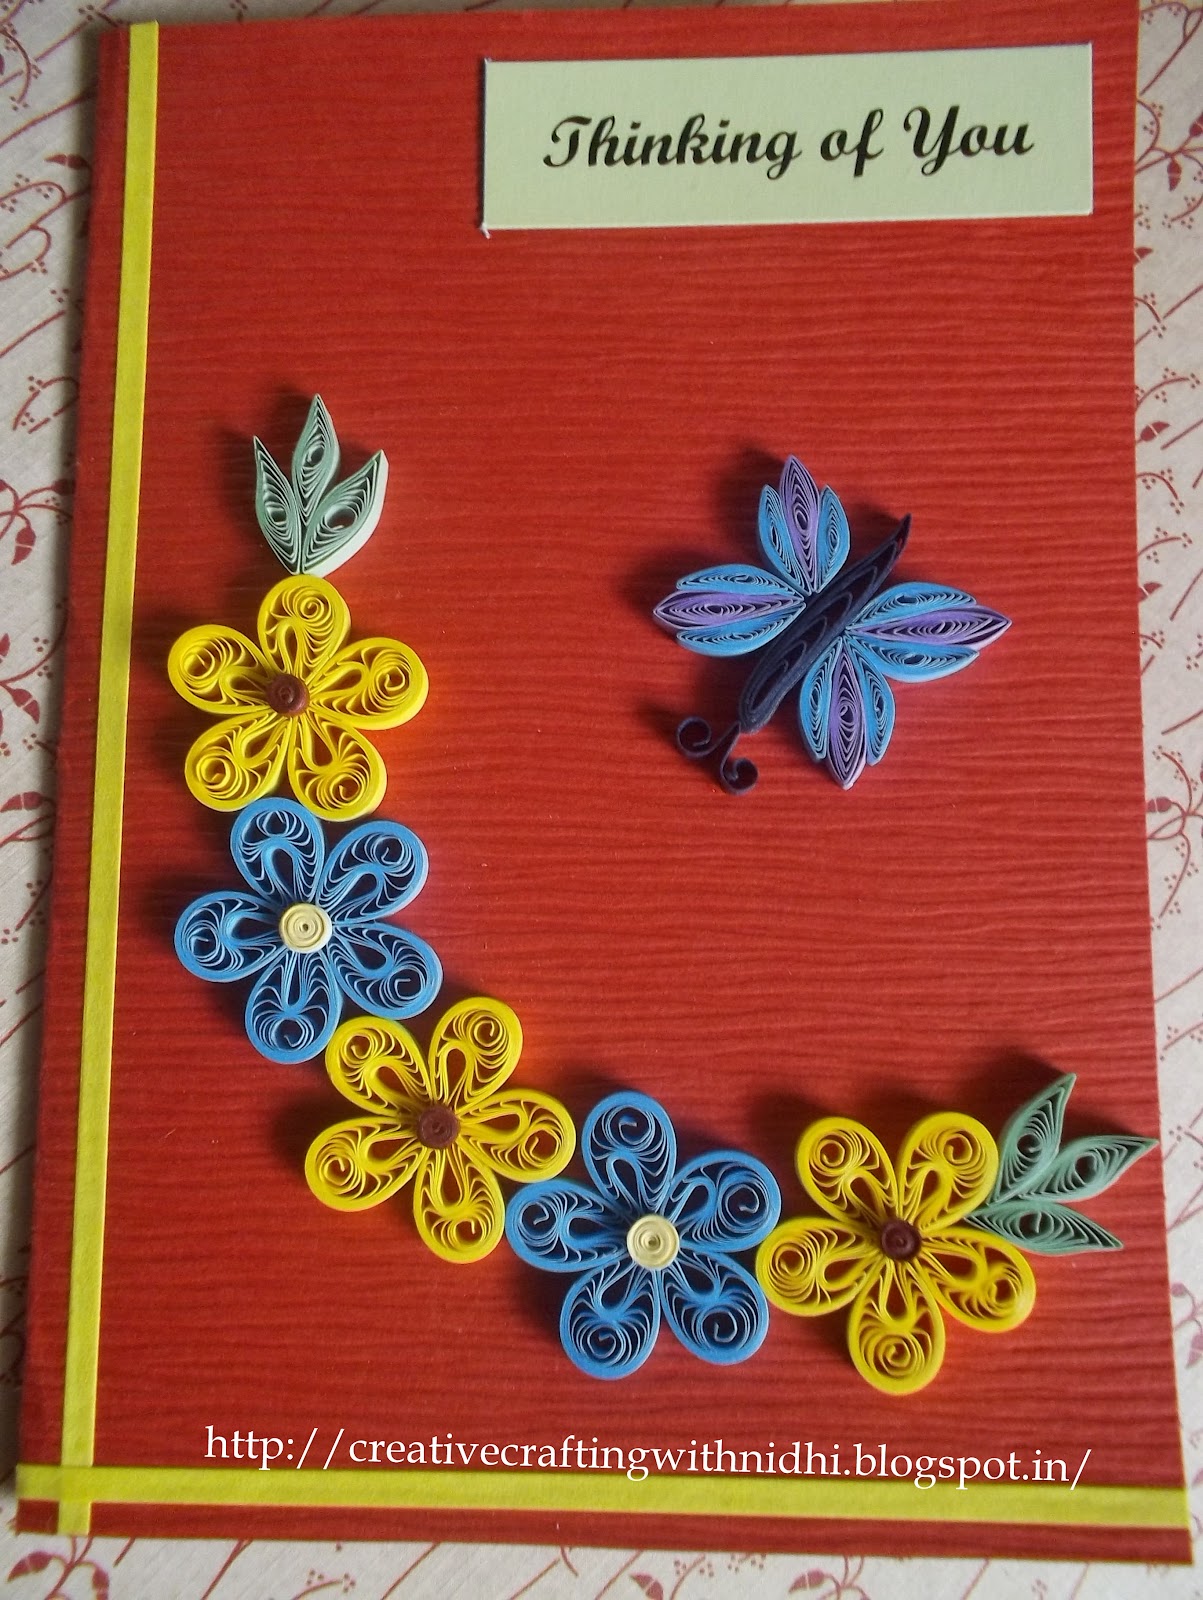 New Paper Quilling Designs of Greeting Cards - Creative 